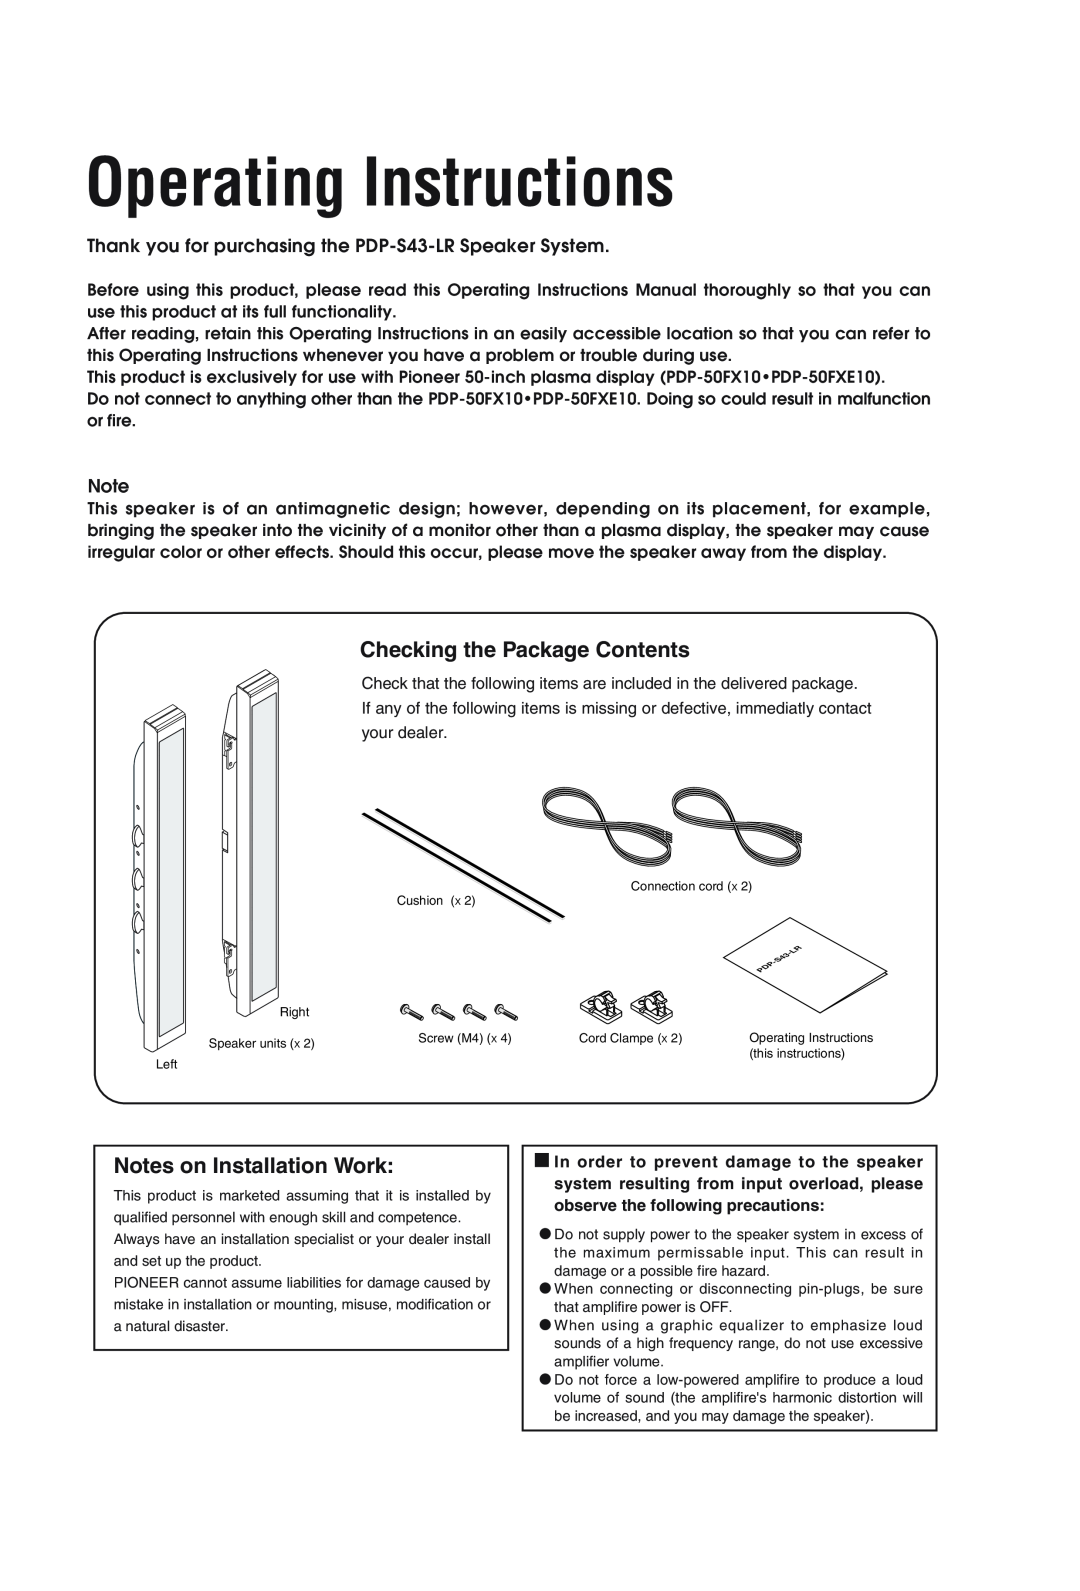 Pioneer PDP-S43-LR manual Operating Instructions, Checking the Package Contents, Notes on Installation Work 